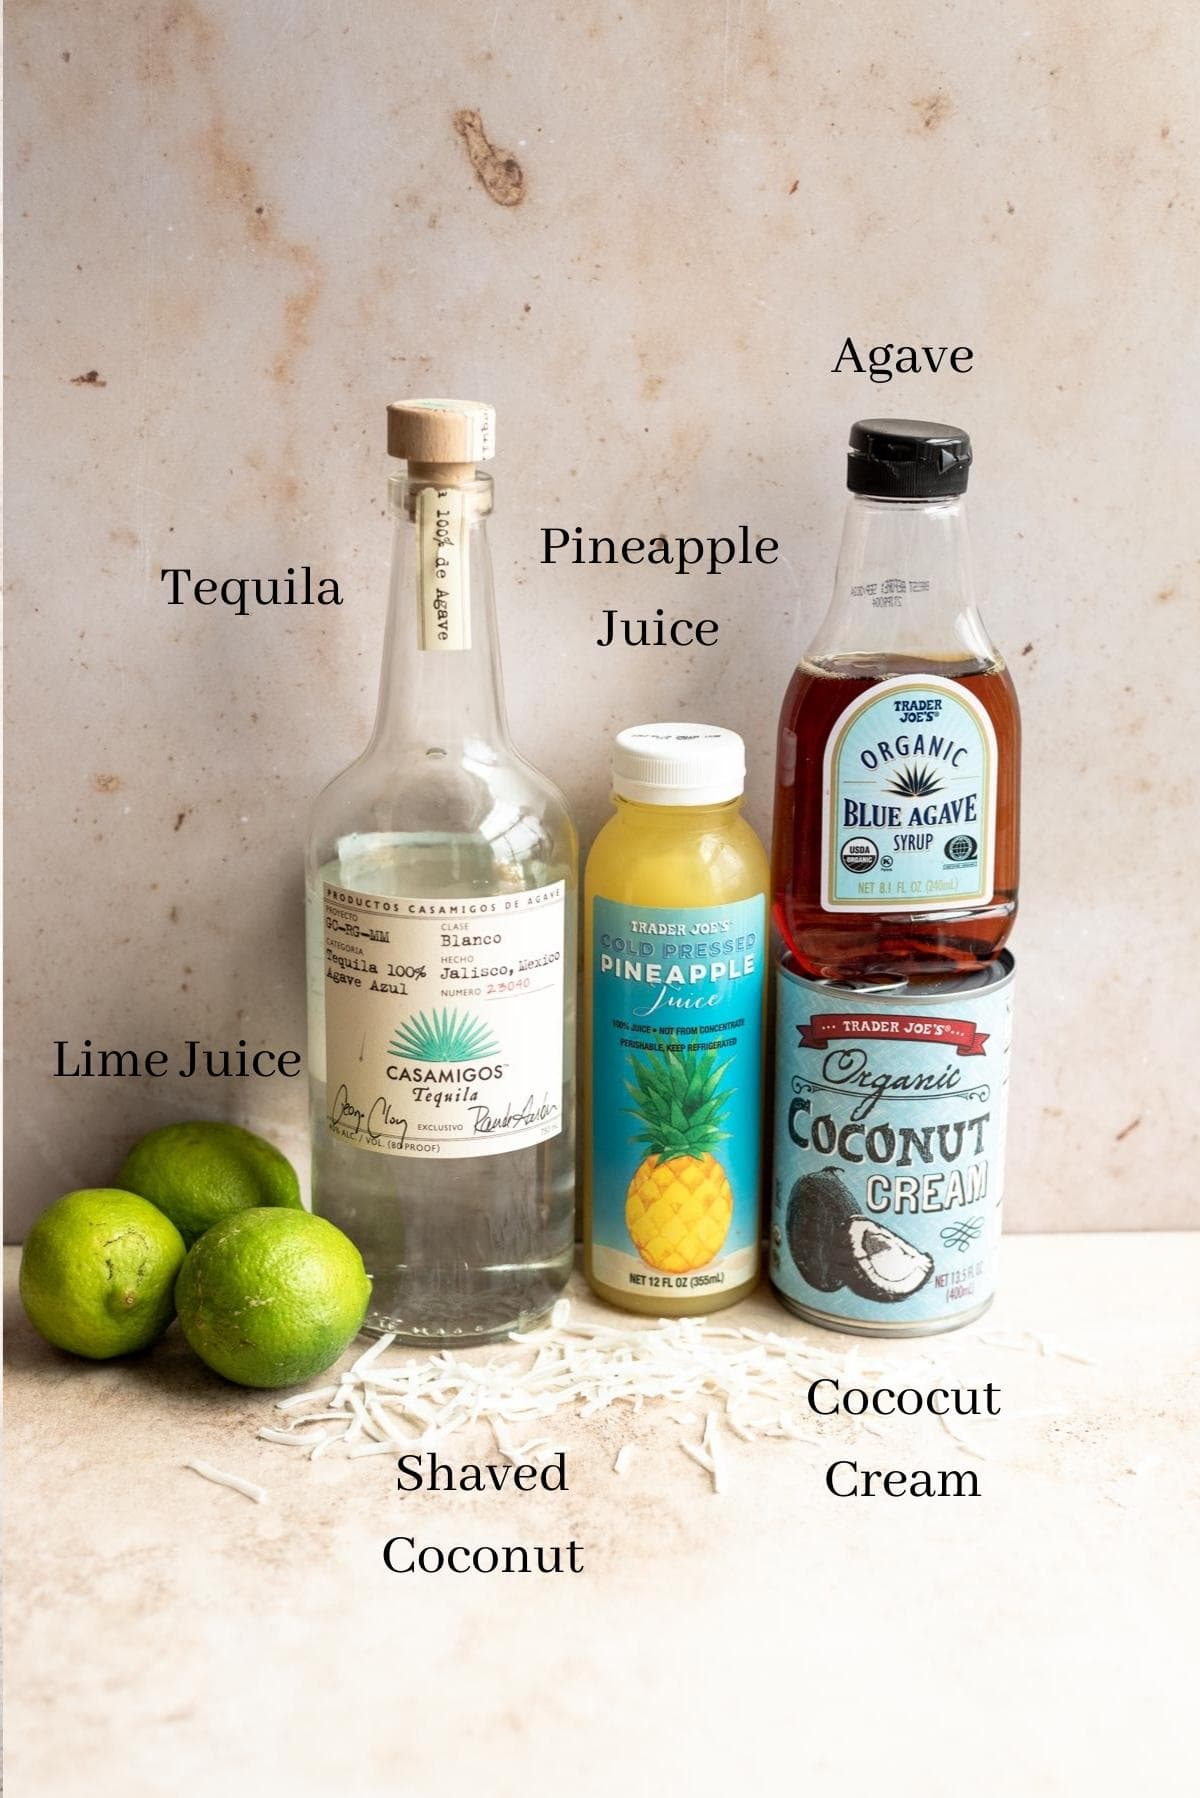 Ingredients for the margarita lined up against a wall.